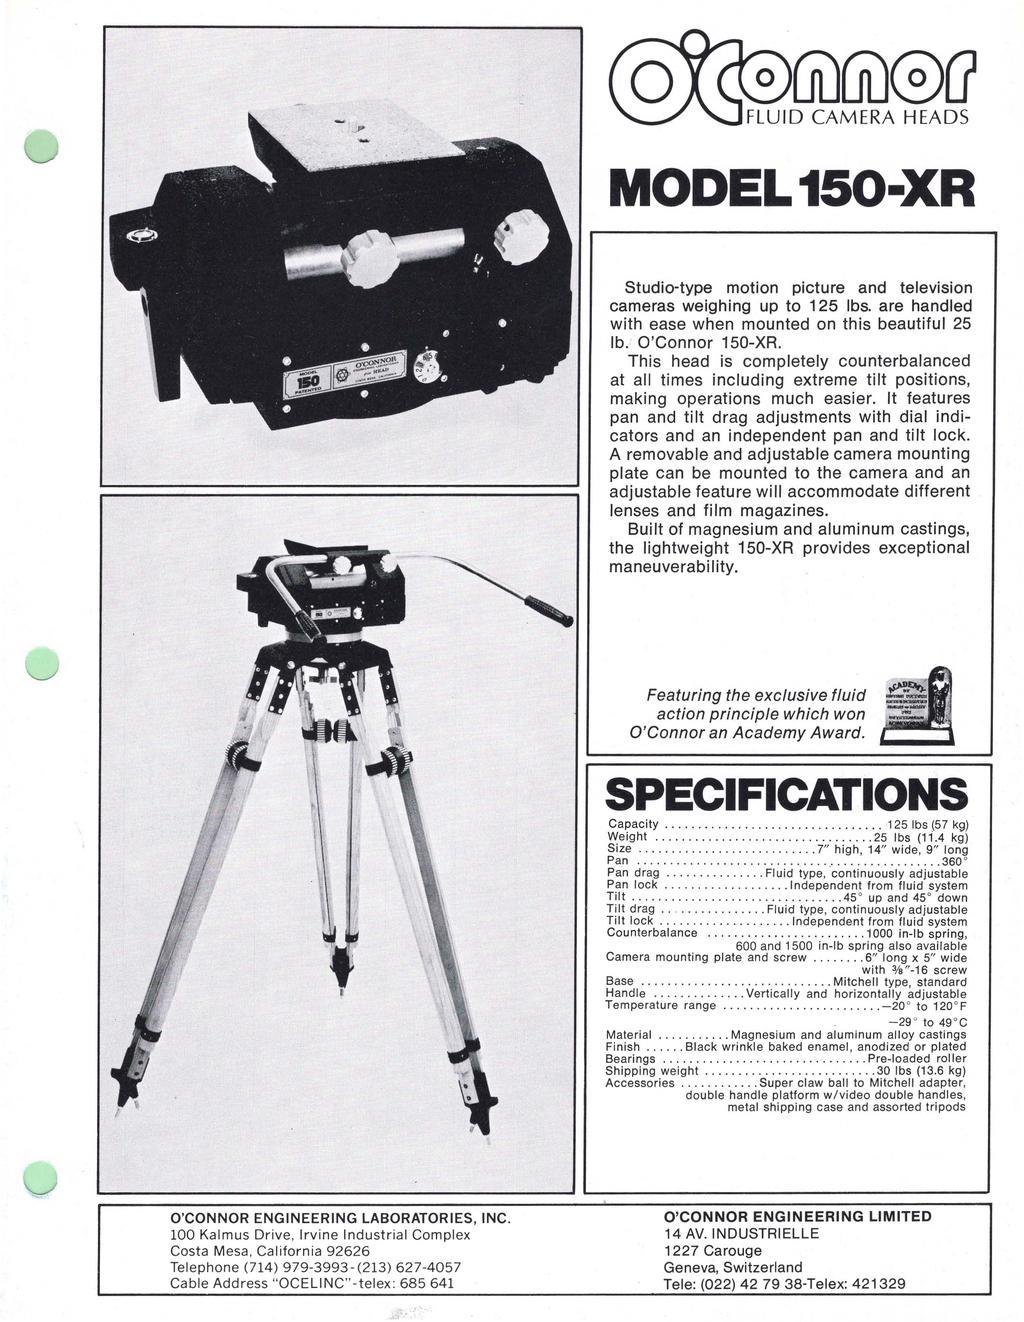 MODEL 150-XR Studio-type motion picture and television cameras weighing up to 125 Ibs. are handled with ease when mounted on this beautiful 25 lb. O'Connor 150-XR.